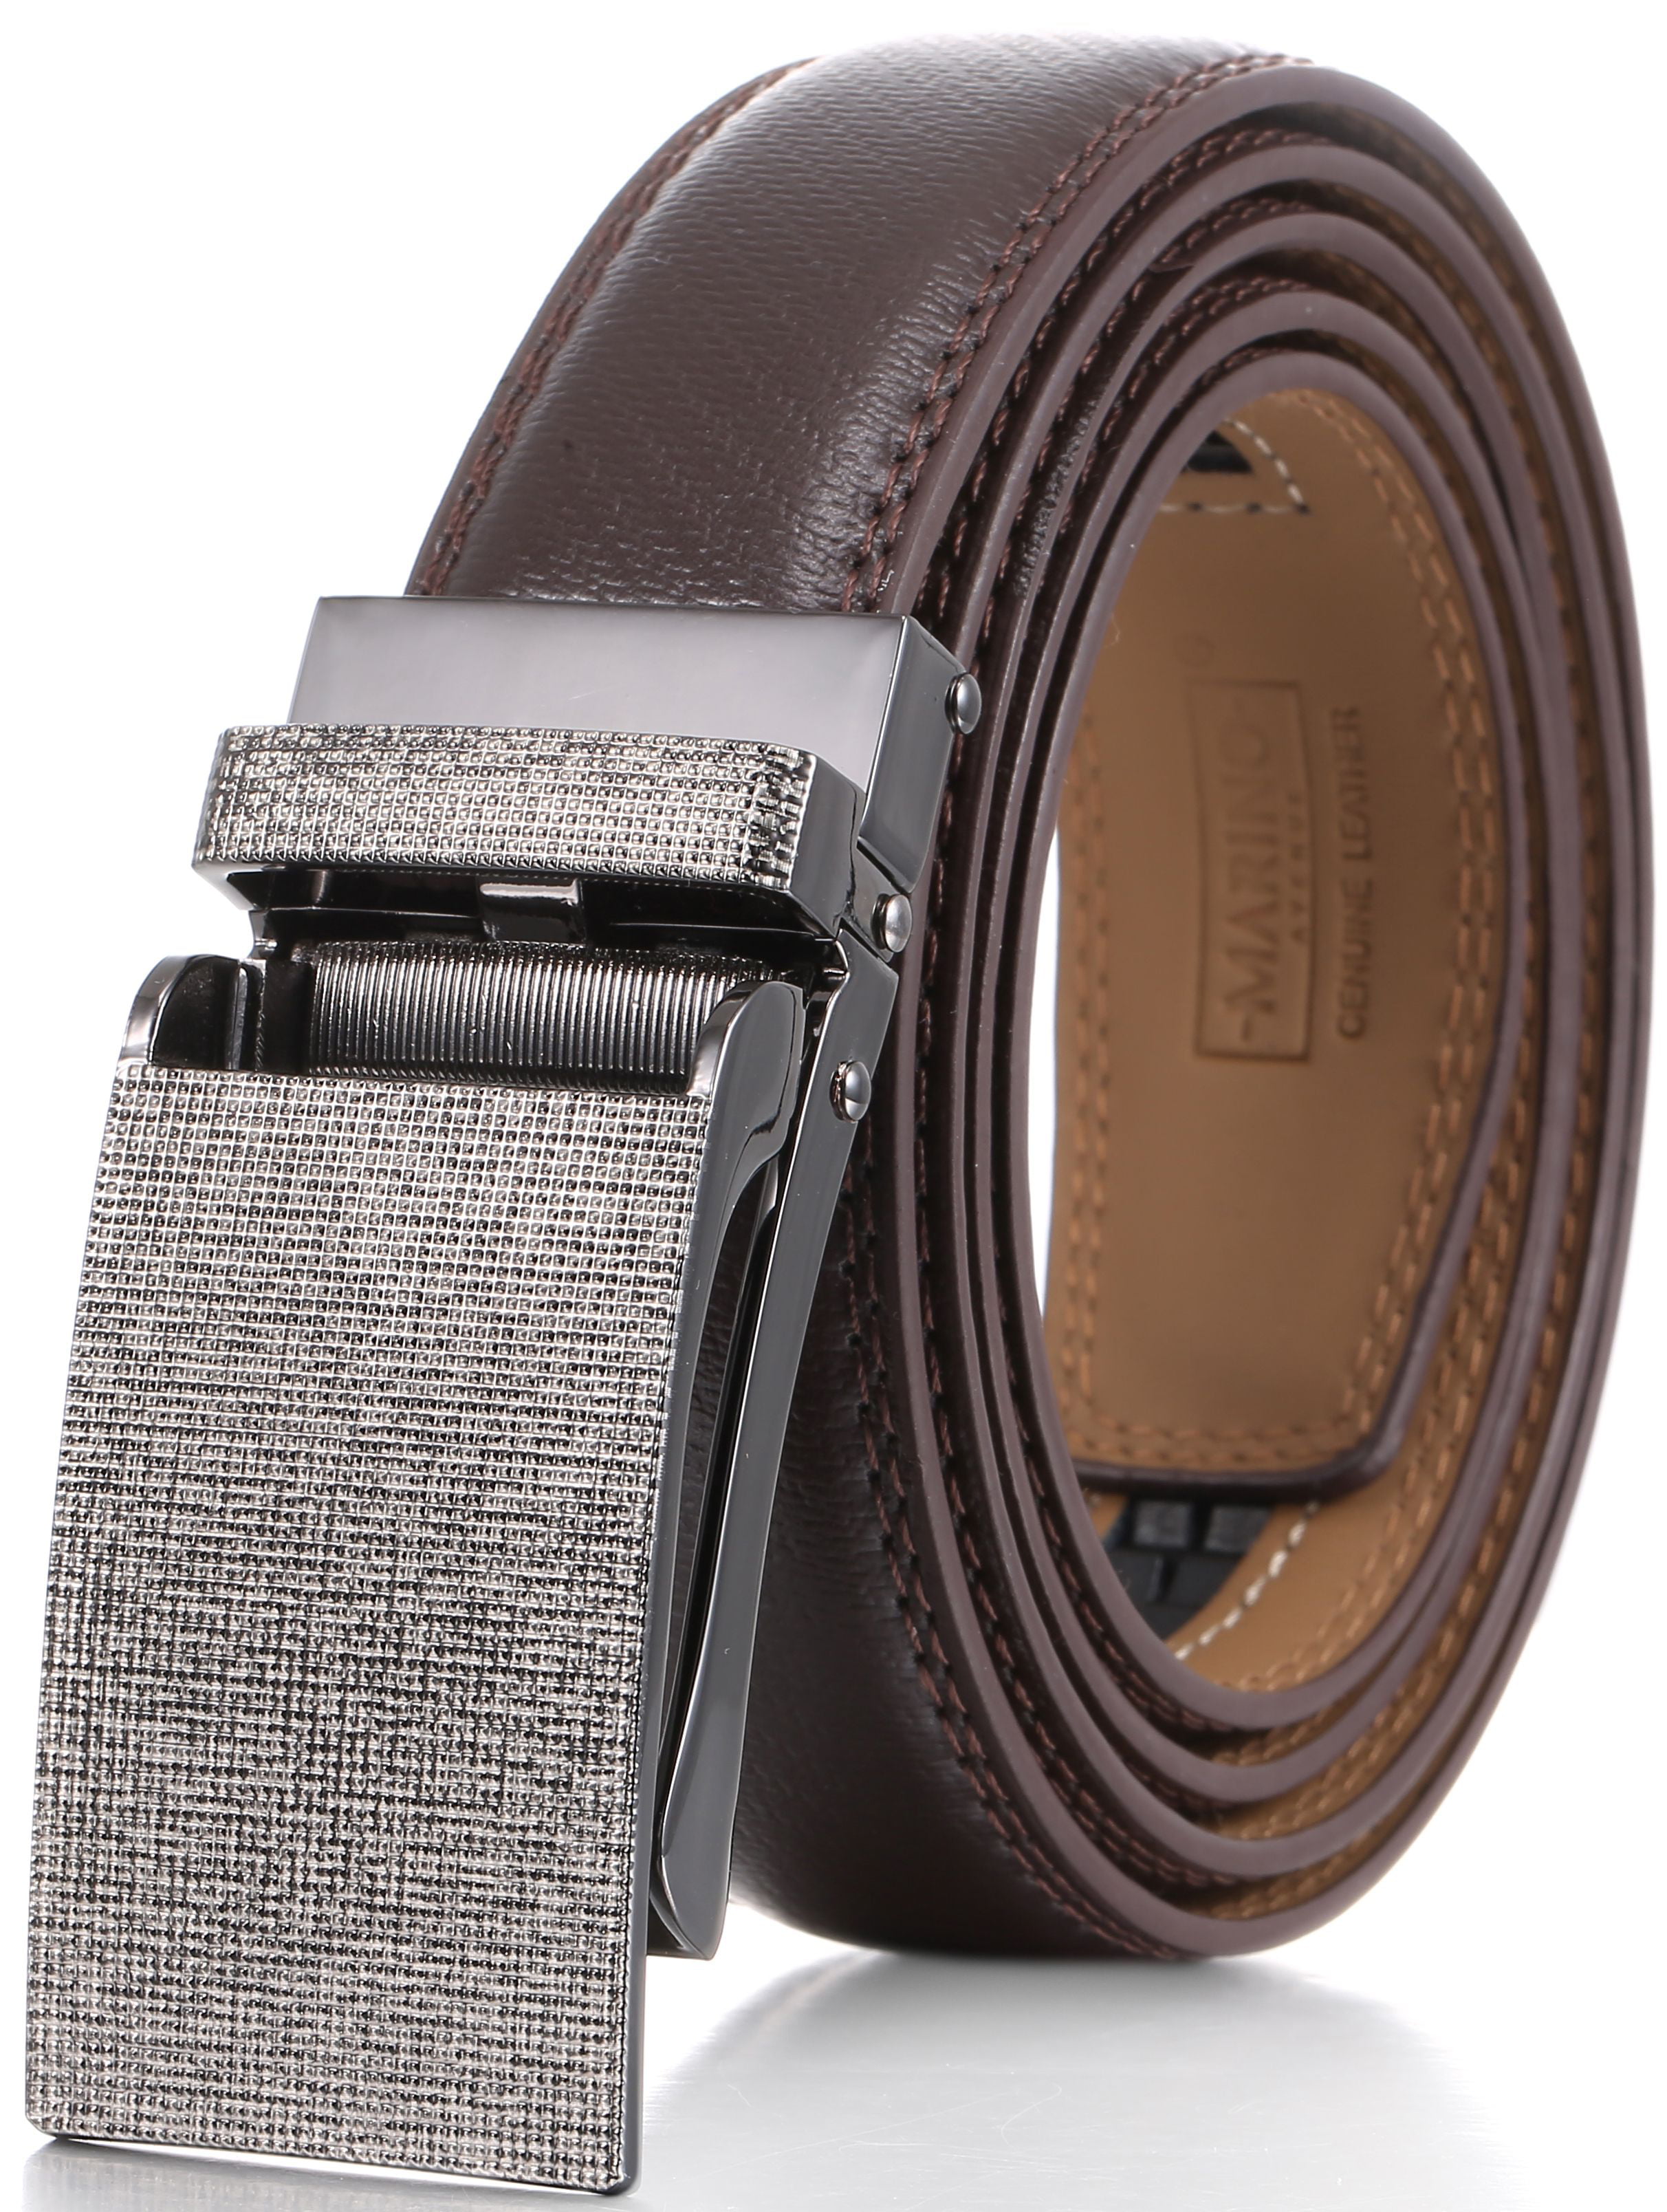 Wide Fully Adjustable to Fit Any Waist Size up To 42 LUXURY MEN’S LEATHER BELT BOXED Automatic Ratchet Buckle Belts in a Variety of Colours 1.5 Genuine Leather Strap 35mm 